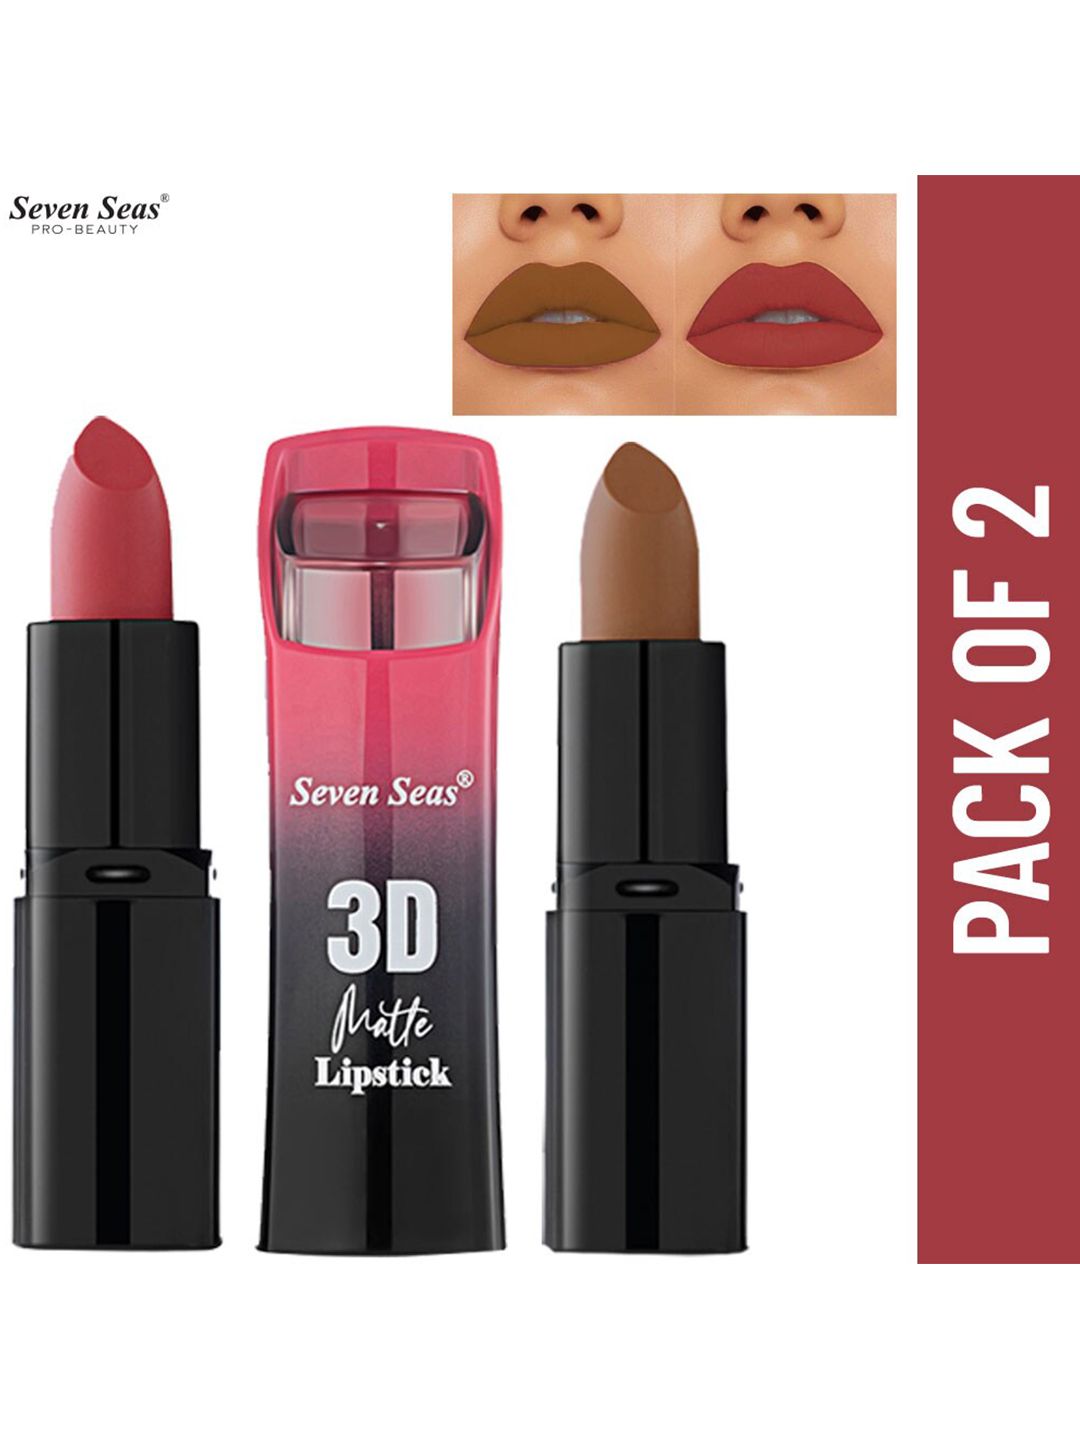 Seven Seas Set of 2 3D Matte Lipstick - Crown of Thorns 1 304 & Apple Candy 314 Price in India